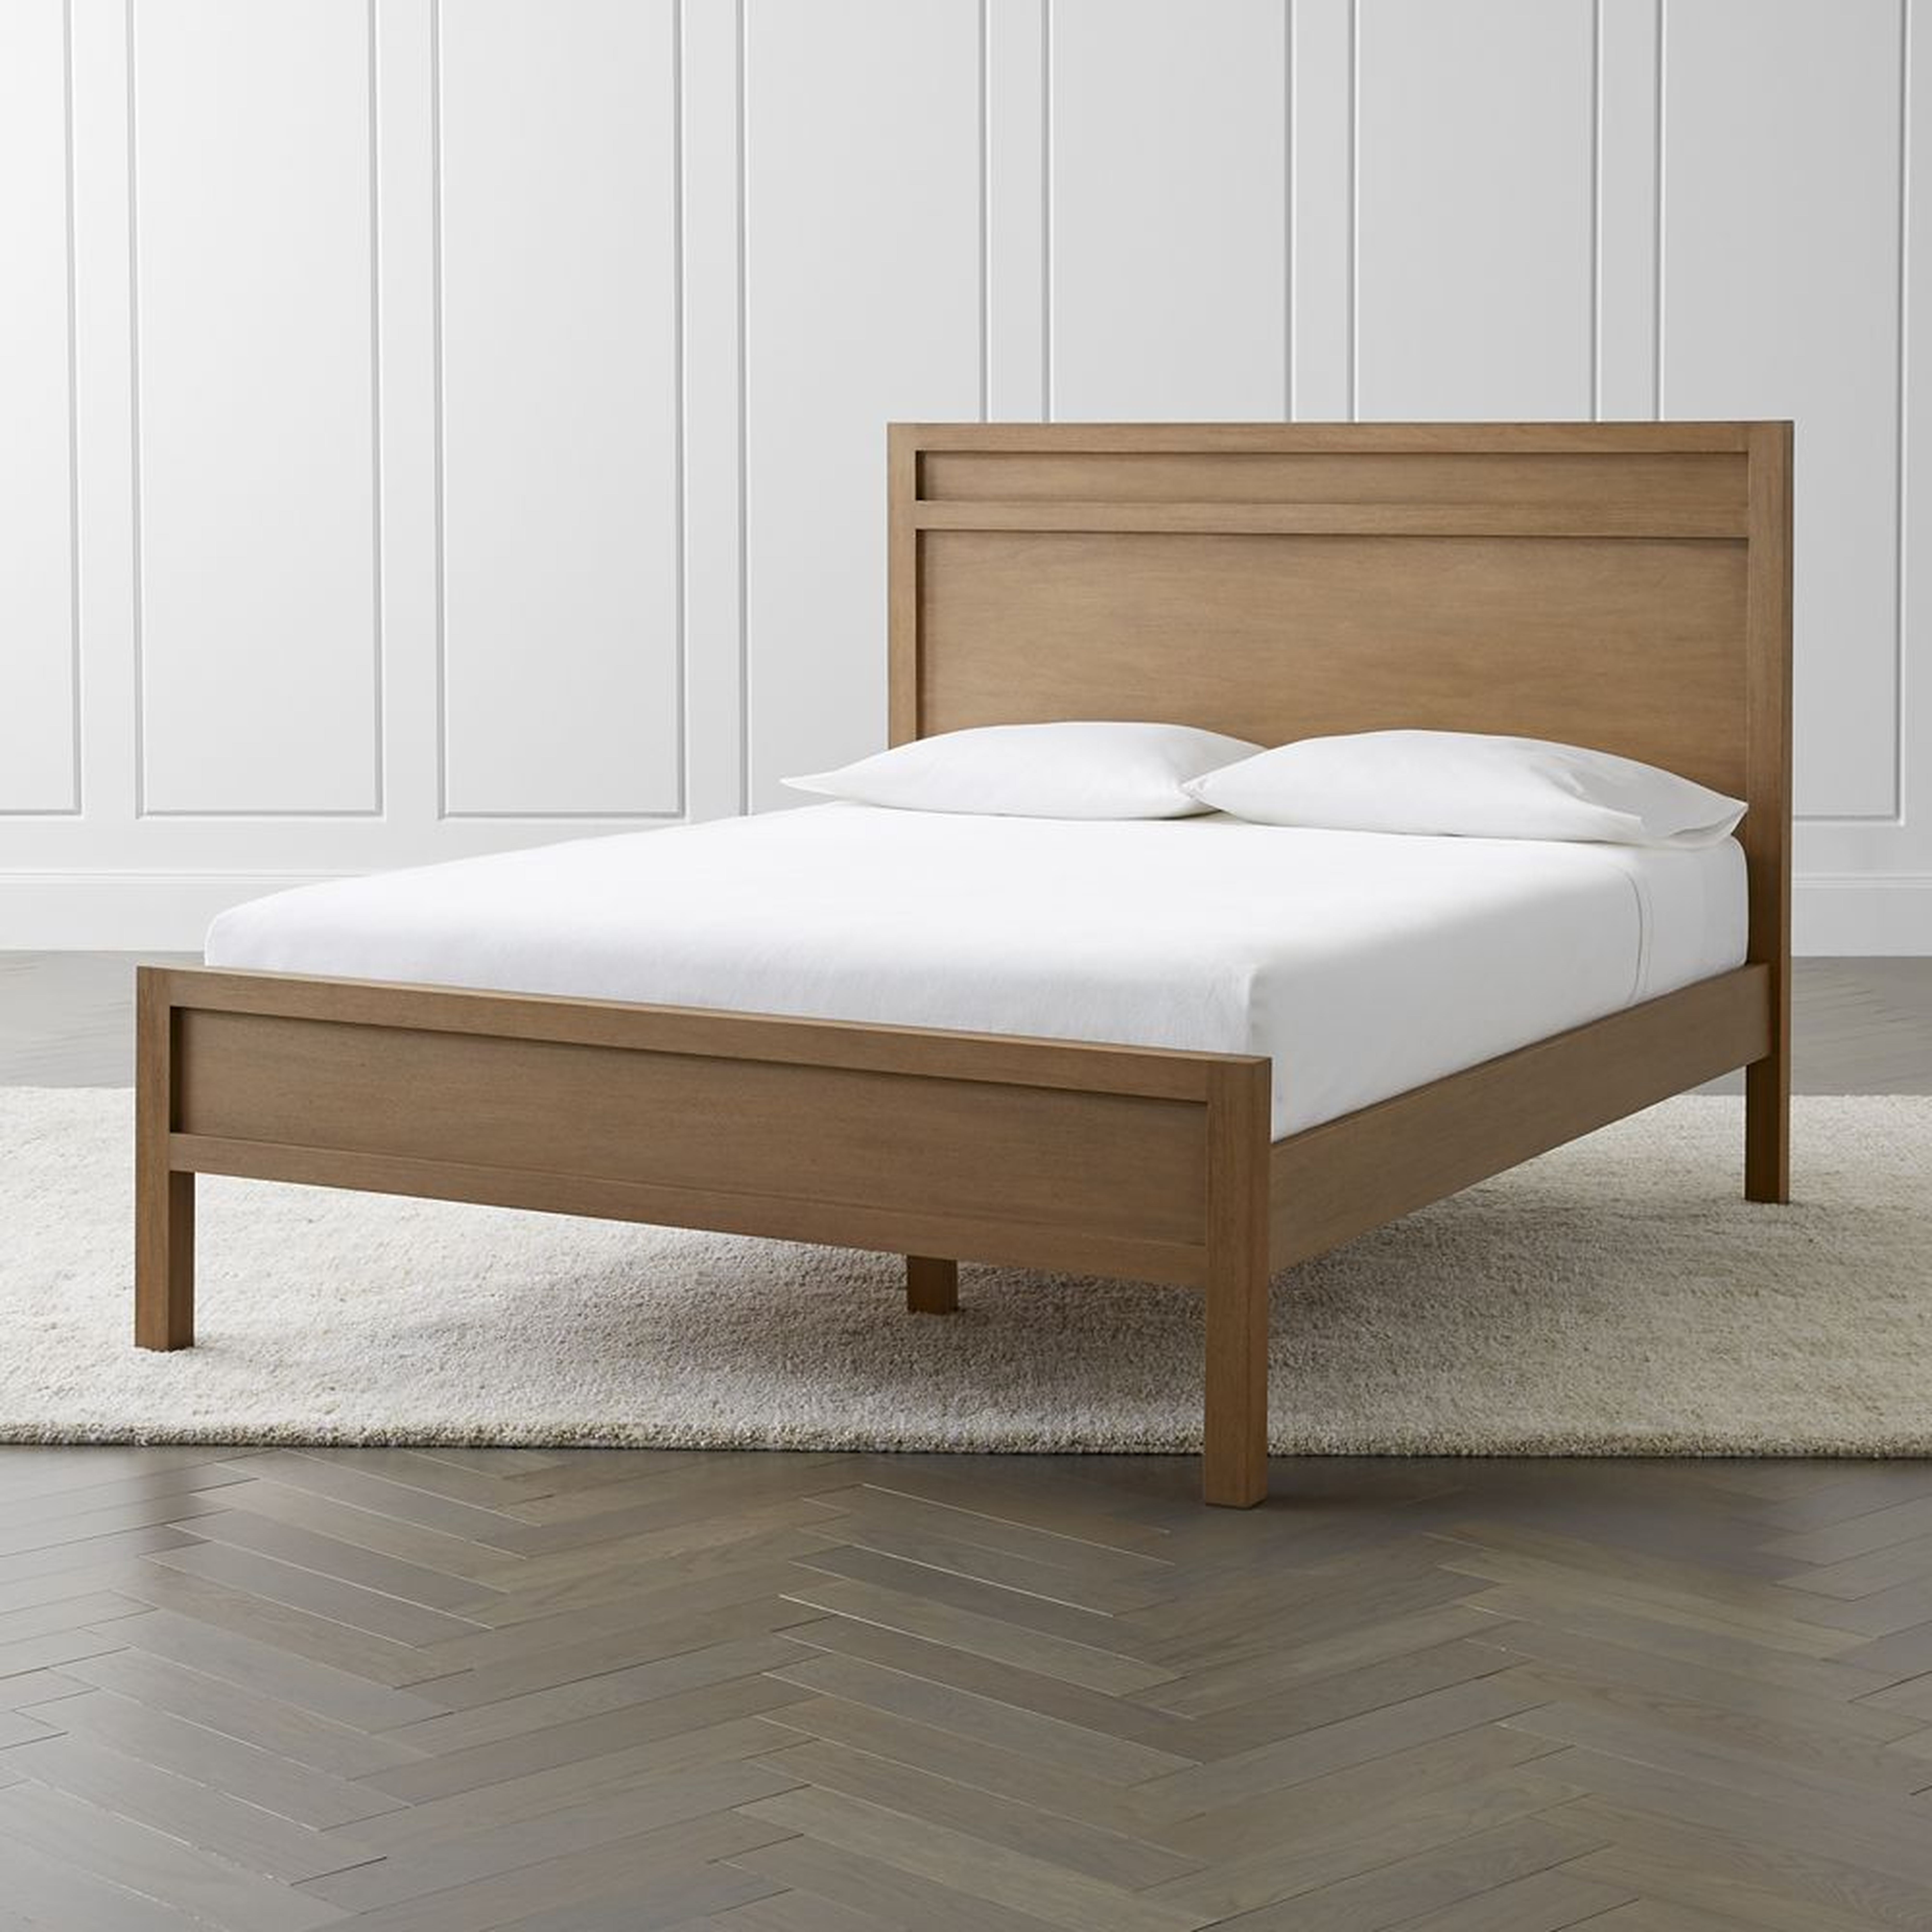 Keane Driftwood Queen Bed - Crate and Barrel